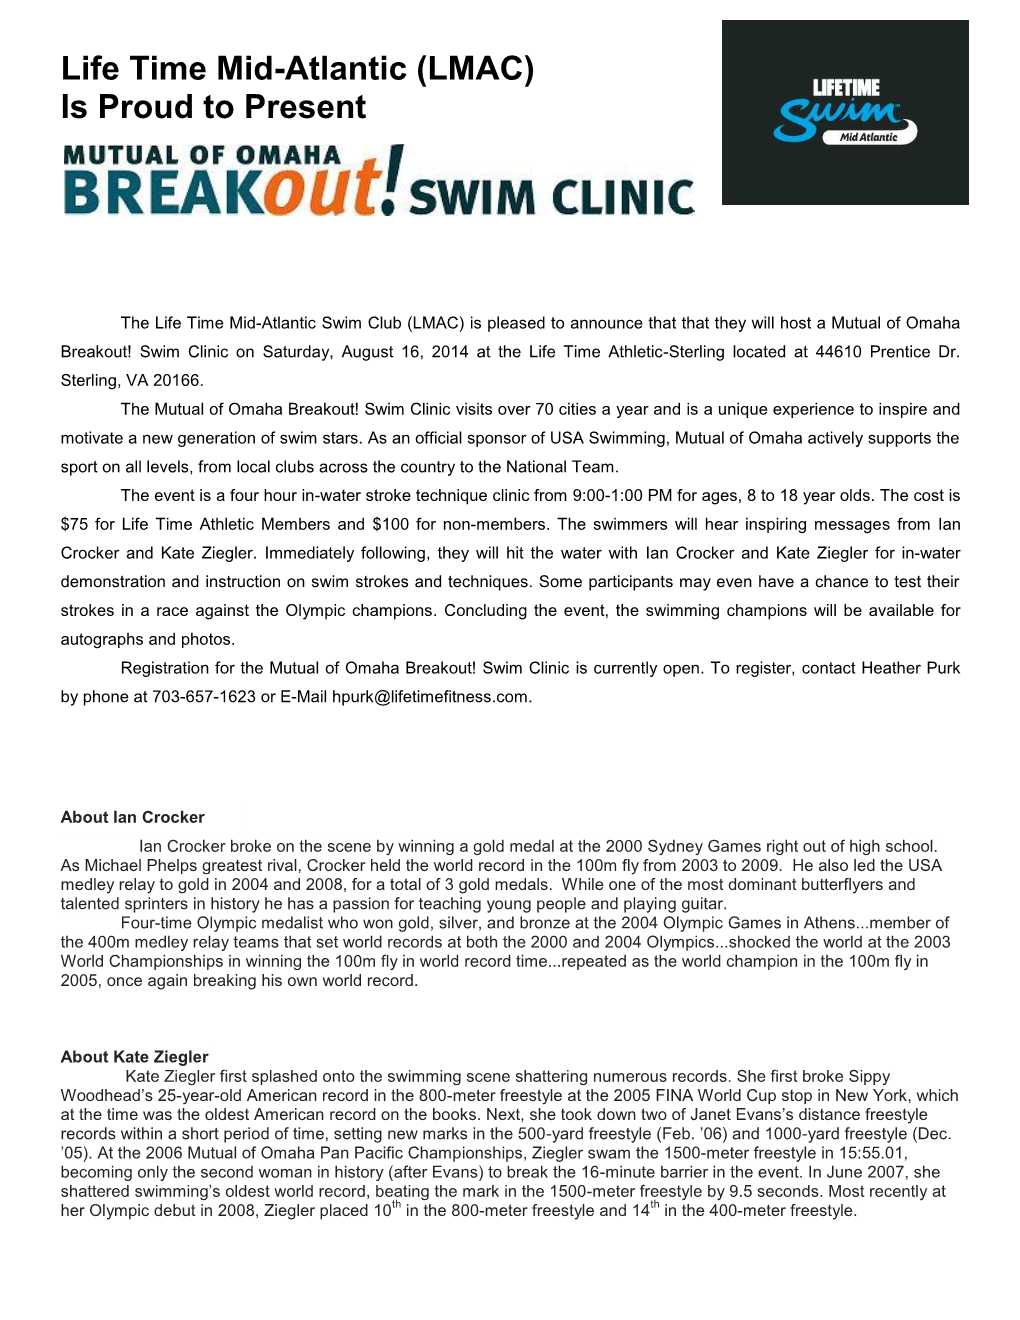 To Start the 2012 Off Right, Life Time Fitness Announces Our New Masters/Tri Swimming Programming